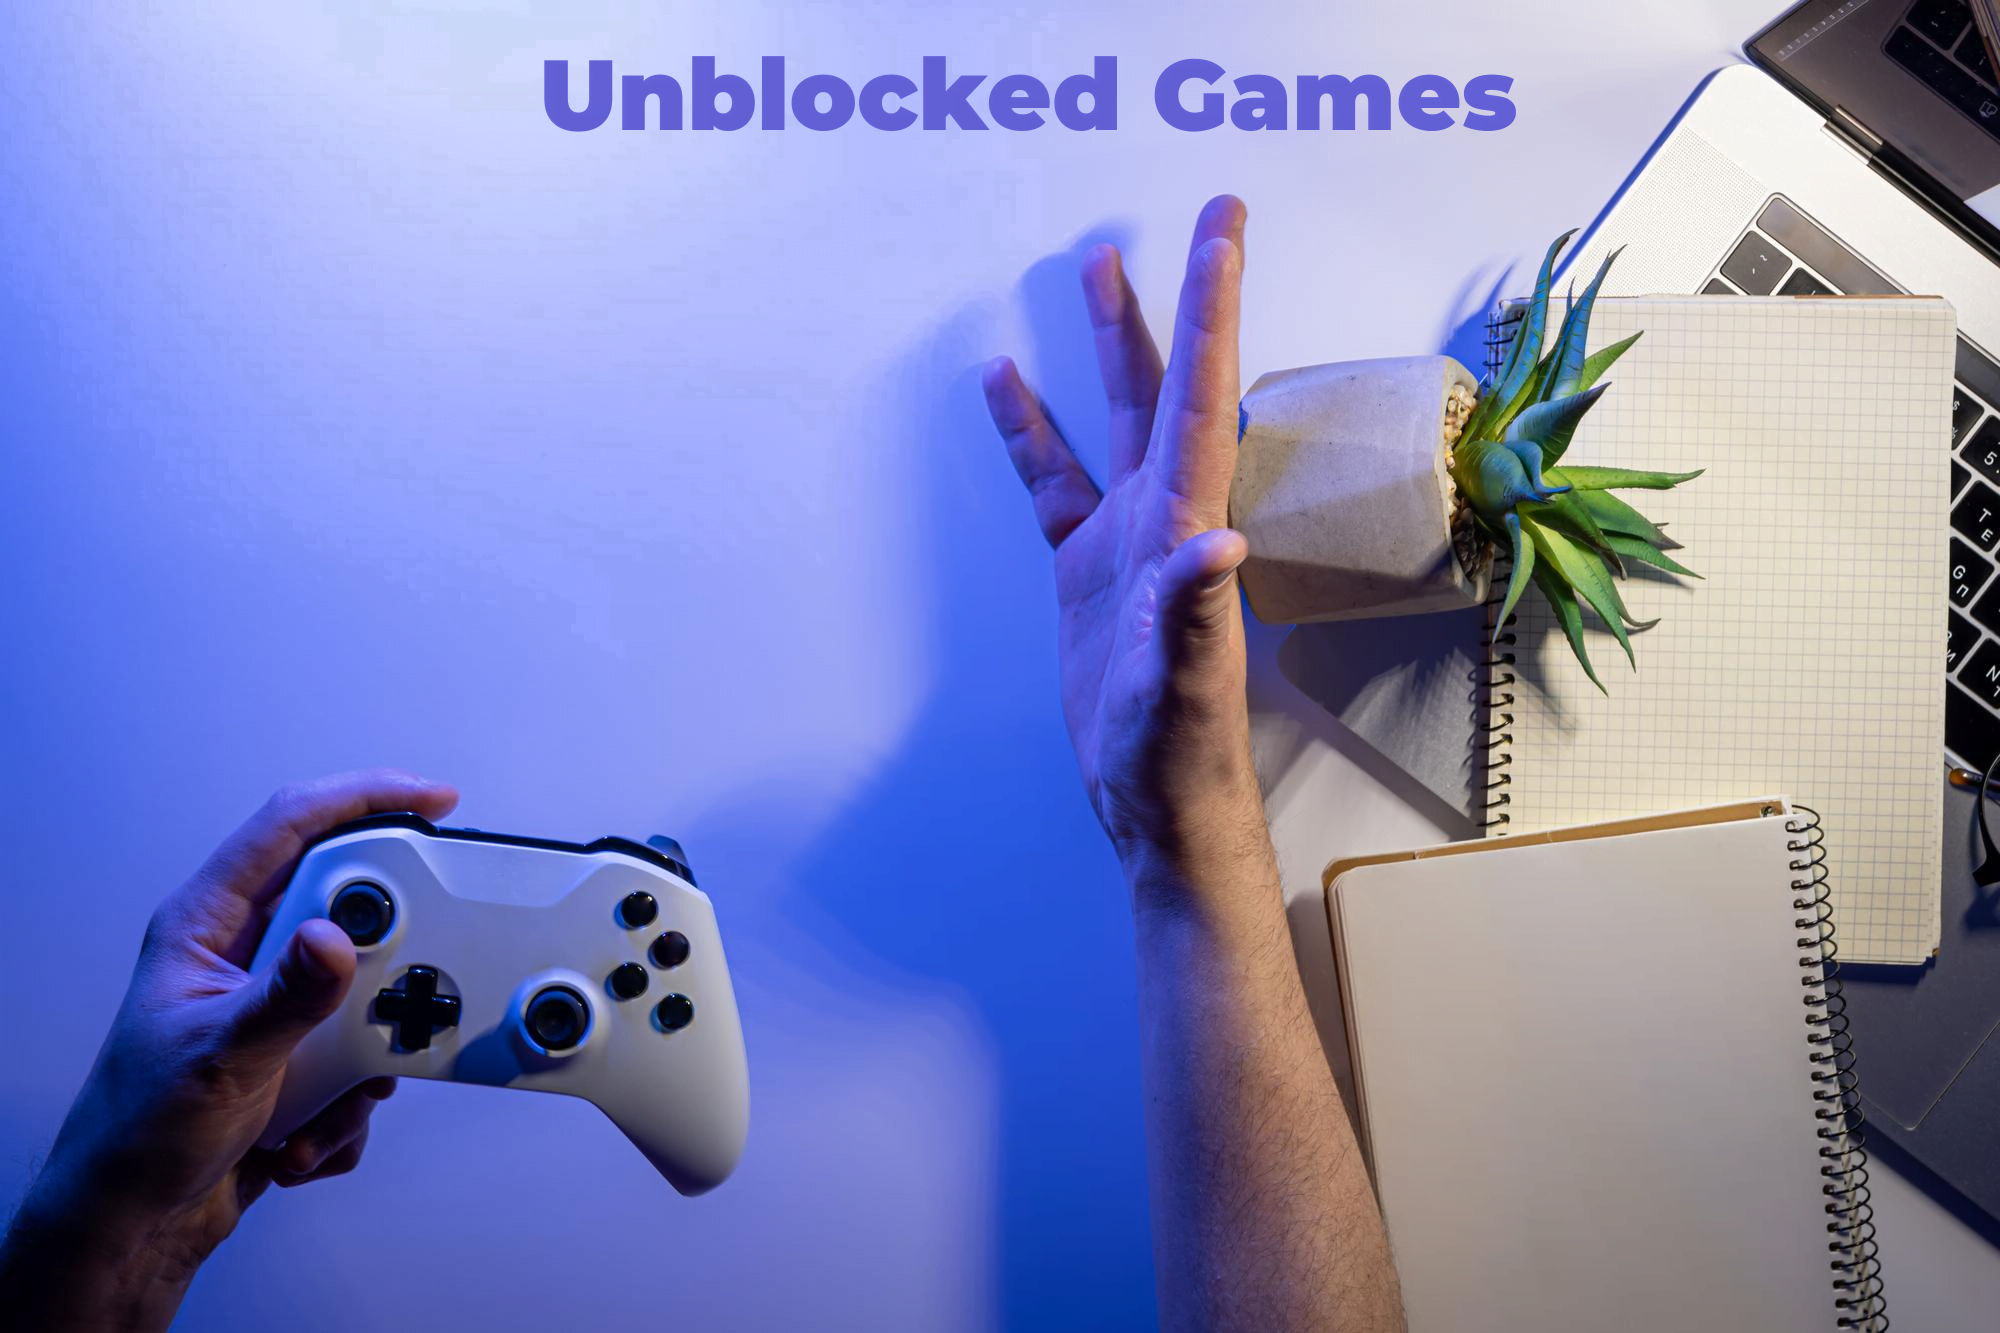 UnblockedGames WTF: Things You Never Know! - London Dream UK